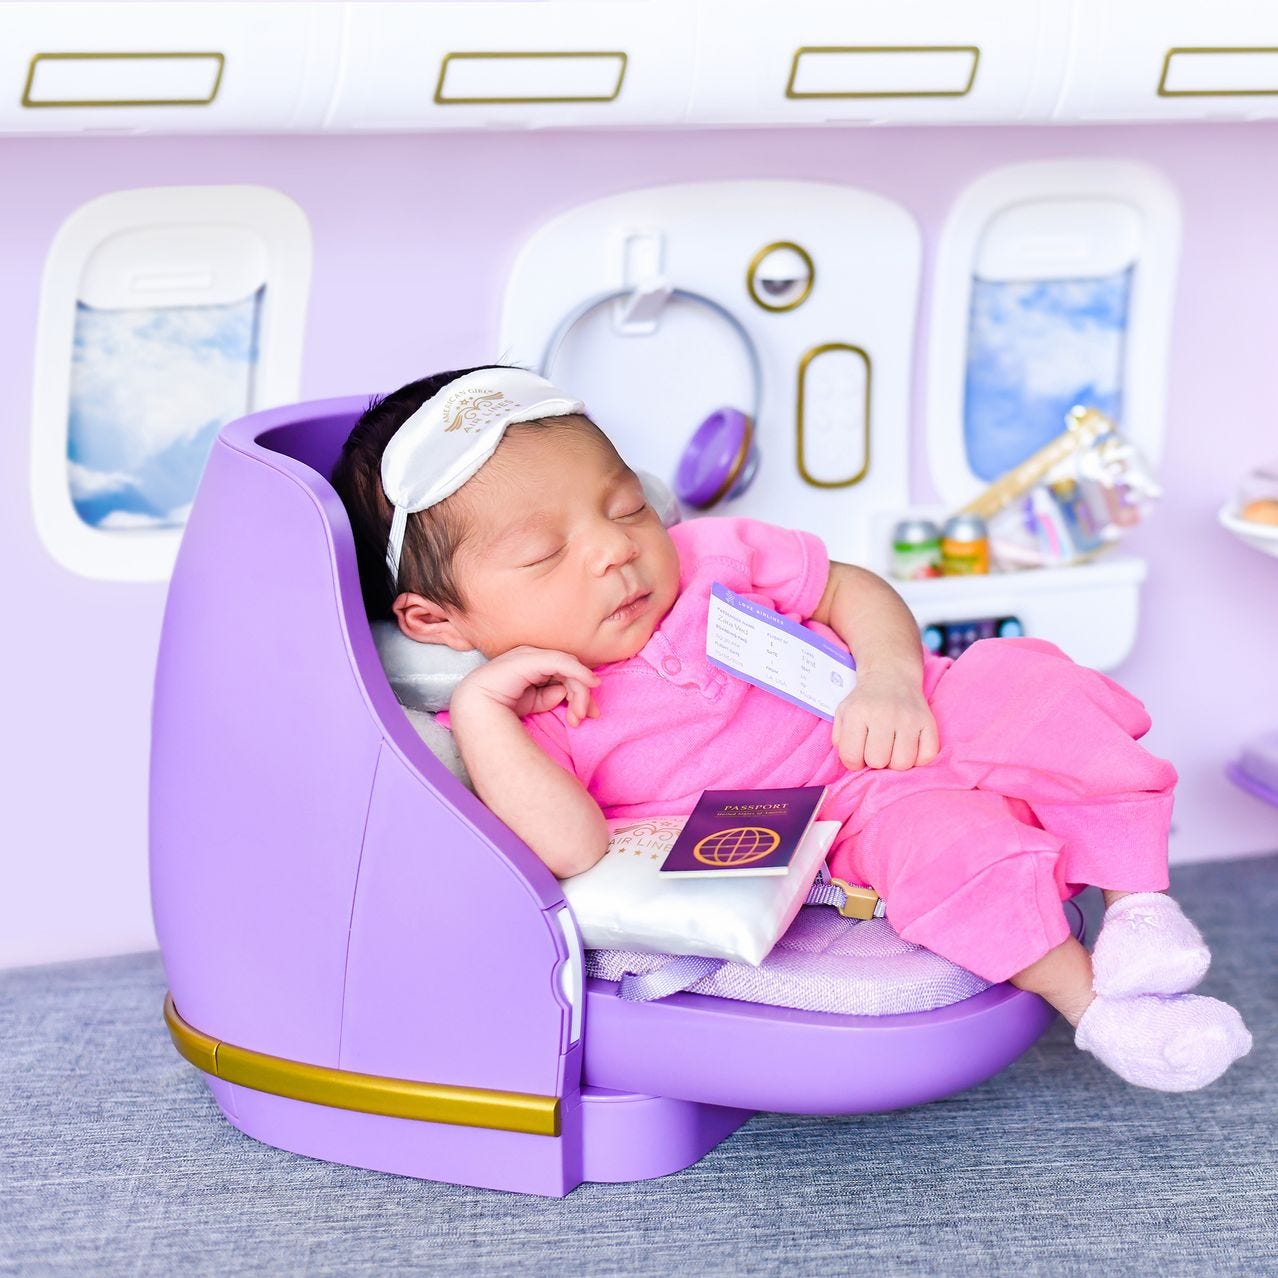 A baby sleeps in a miniature first-class airline cabin for her picture, wearing a sleep mask and clutching a ticket to Spain.